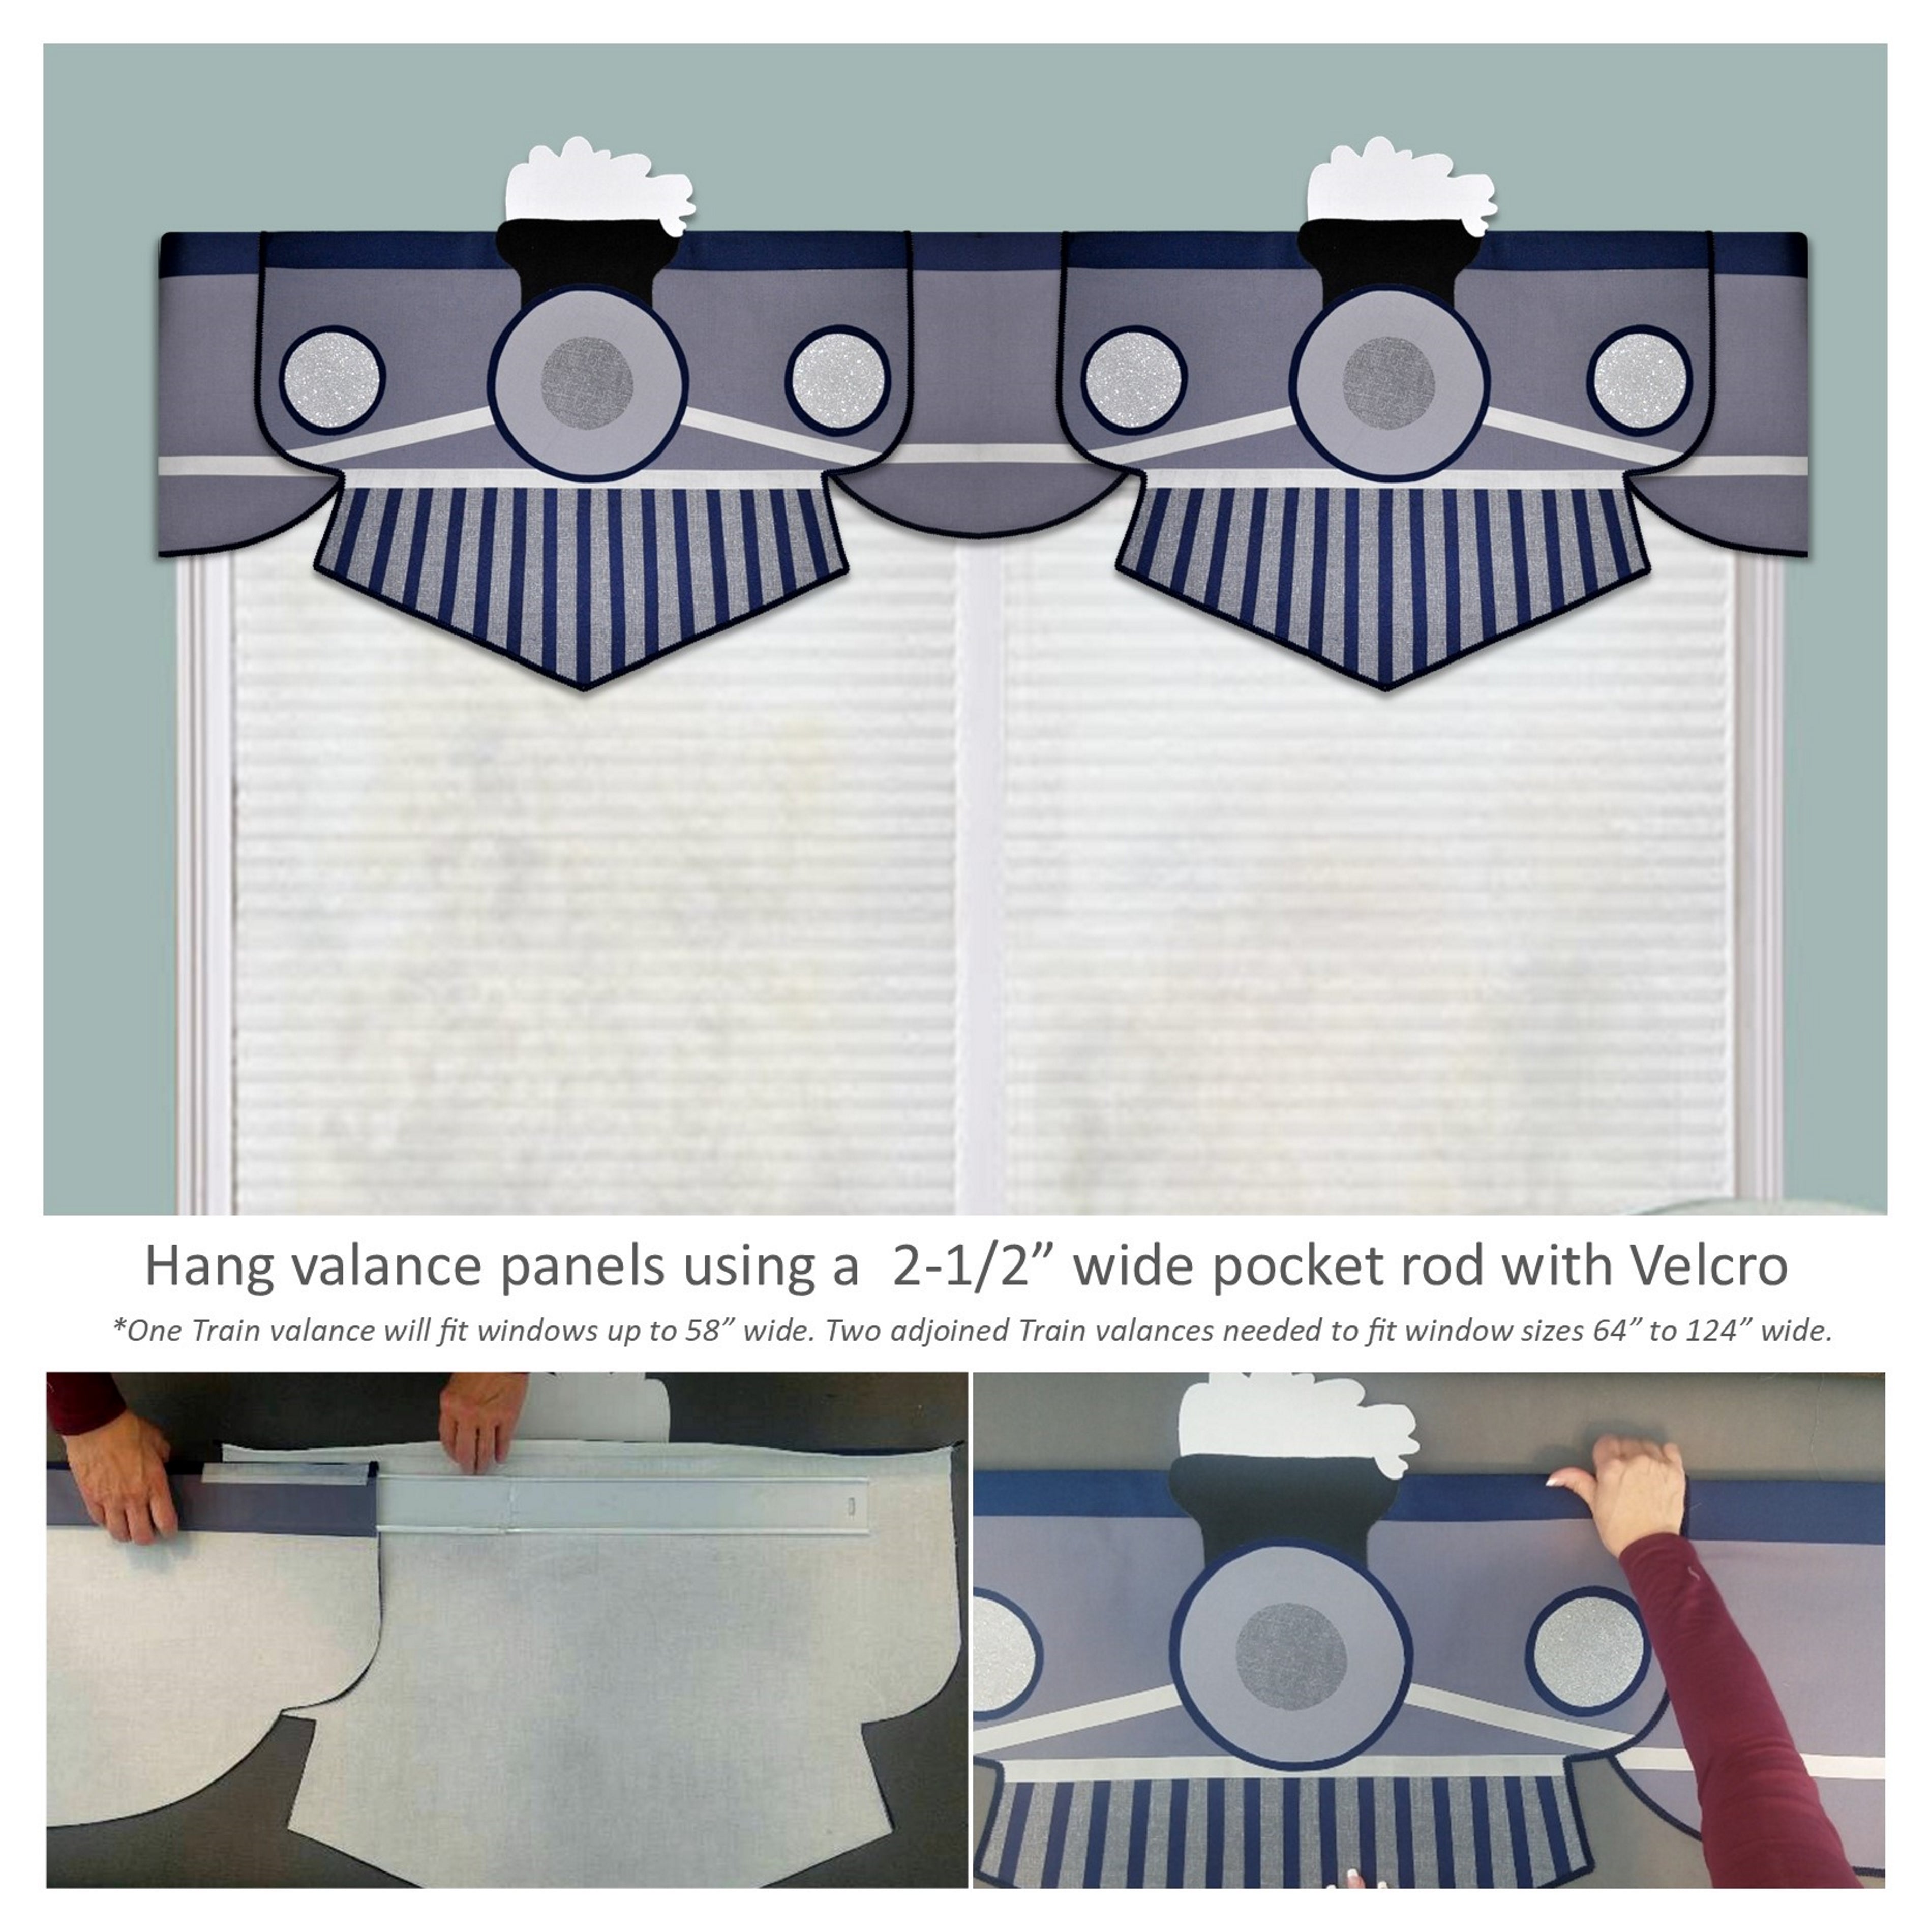 Make an adorable custom boys train valance without sewing! Fabric craft it includes everything you need to assemble and hang your keepsake train. Use two trains to fit window sizes up to 120" wide.